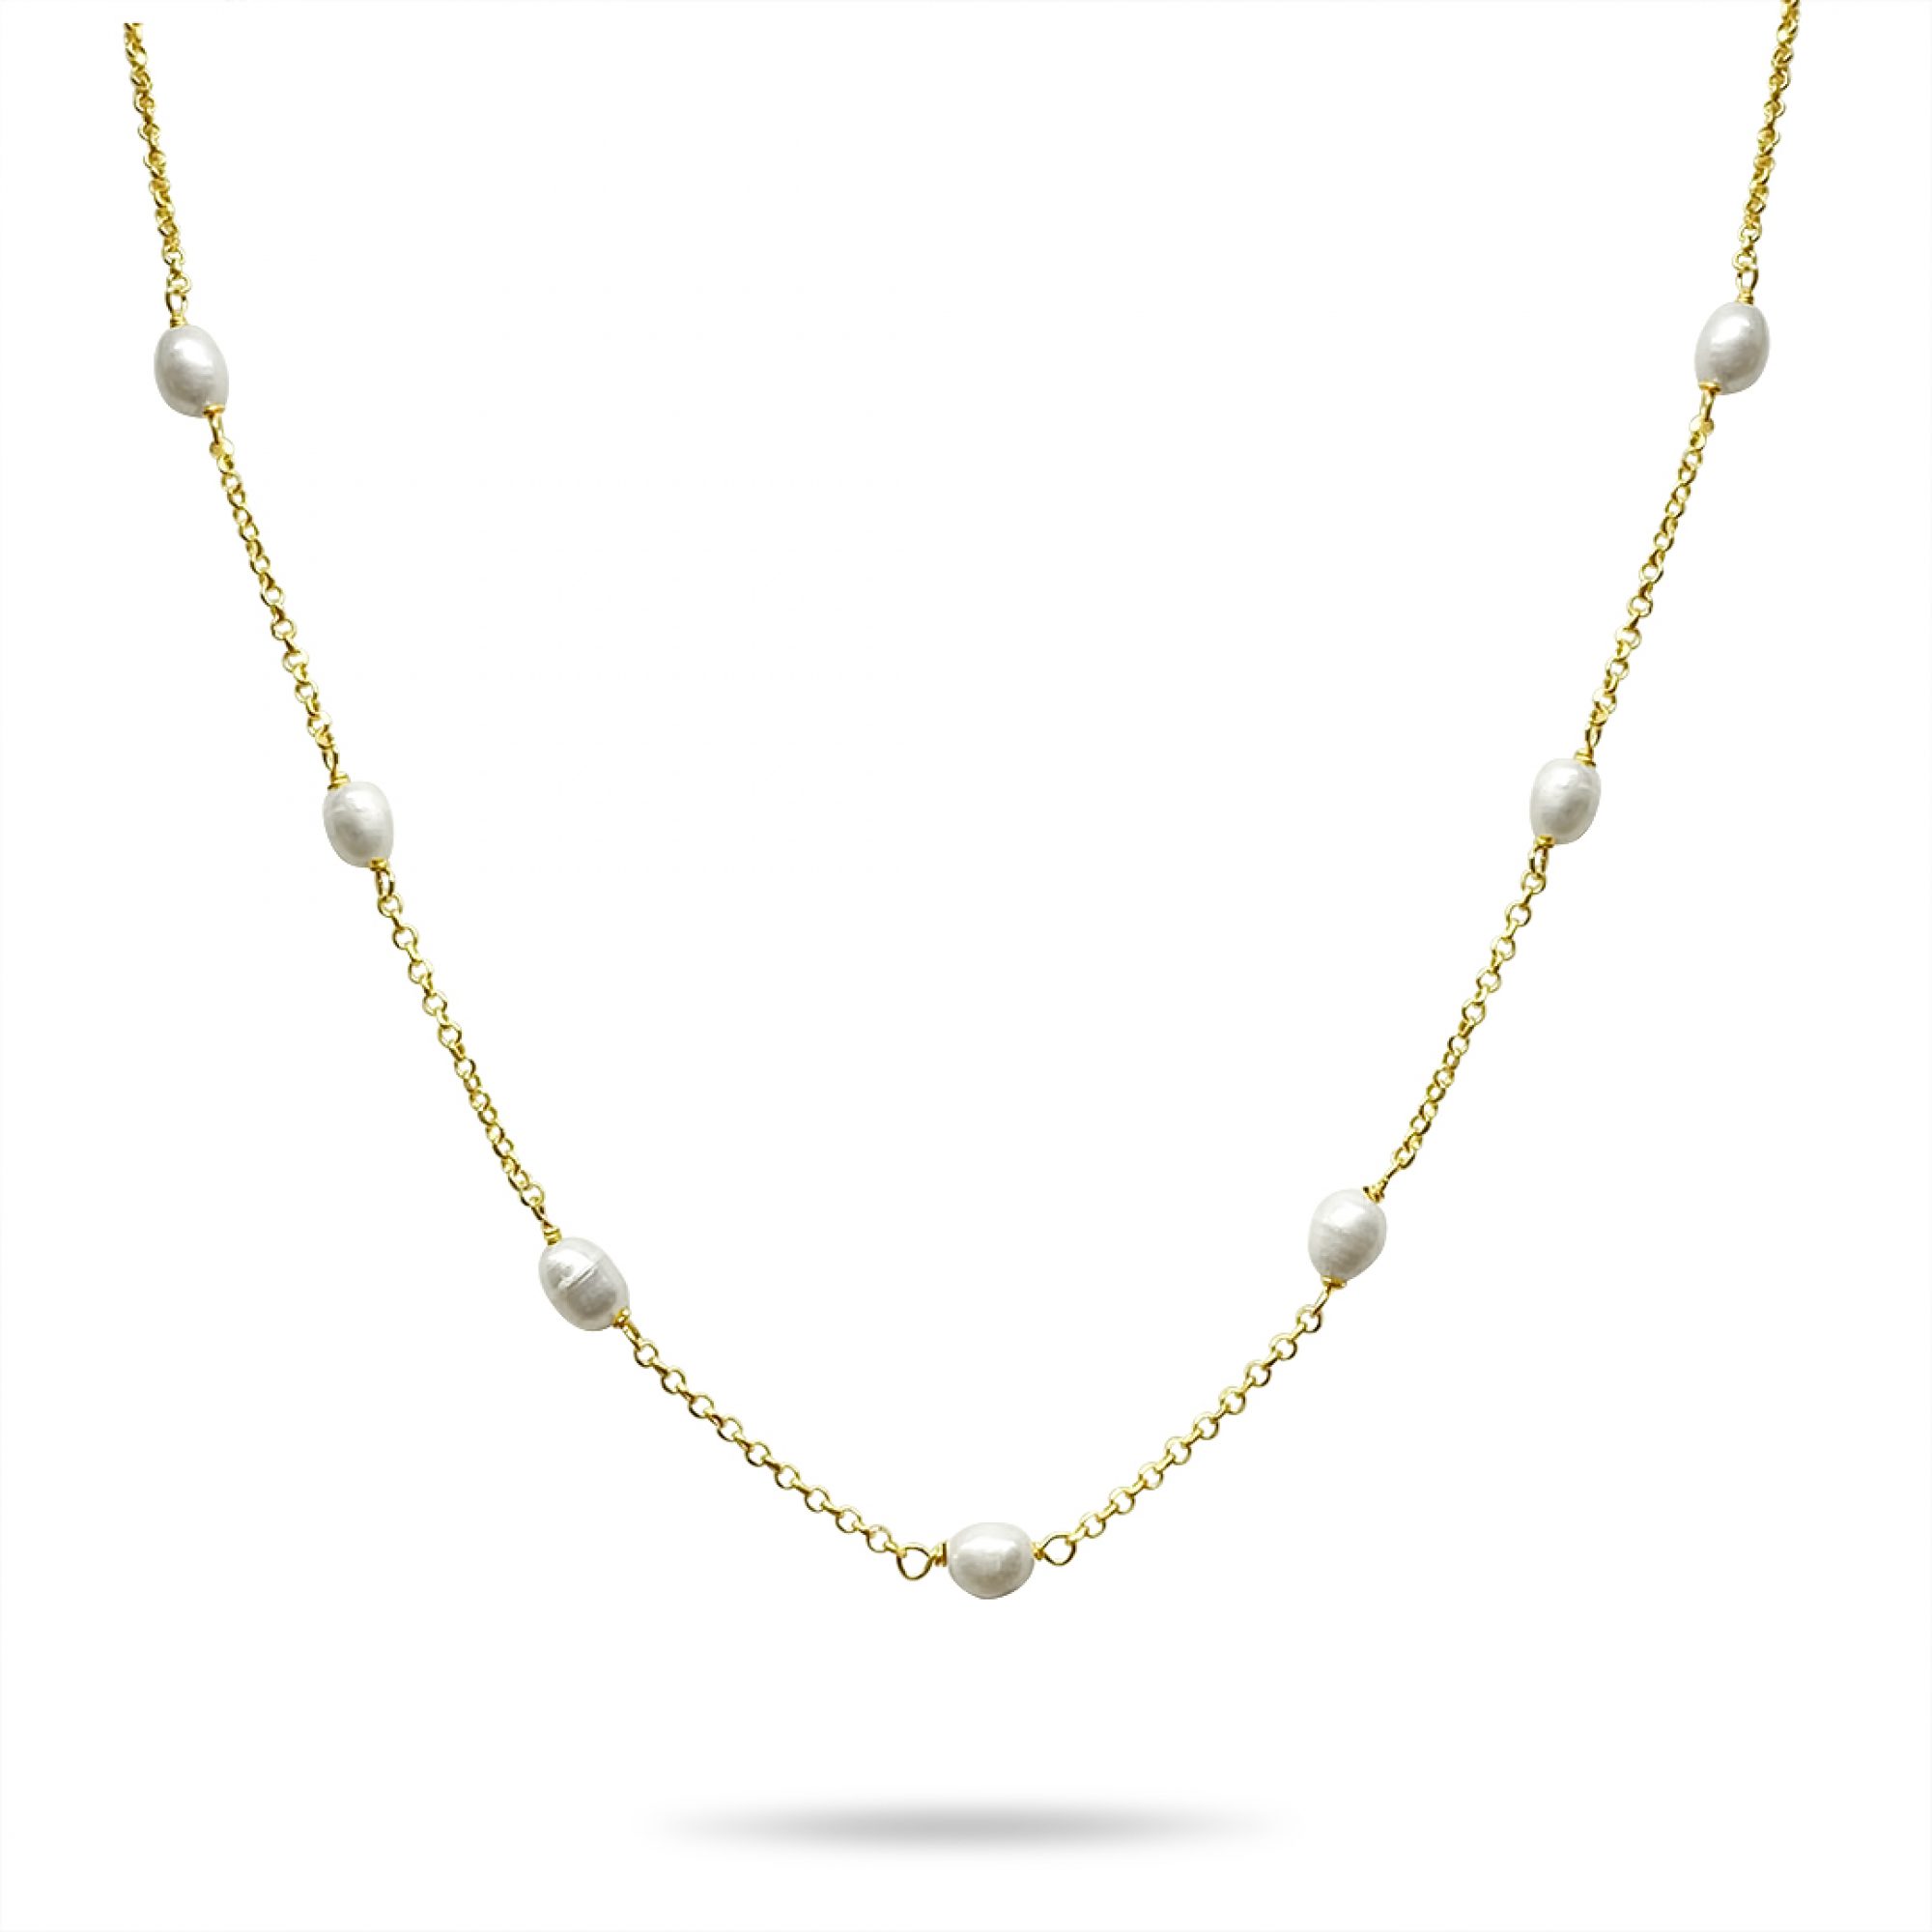 Gold plated necklace with pearls